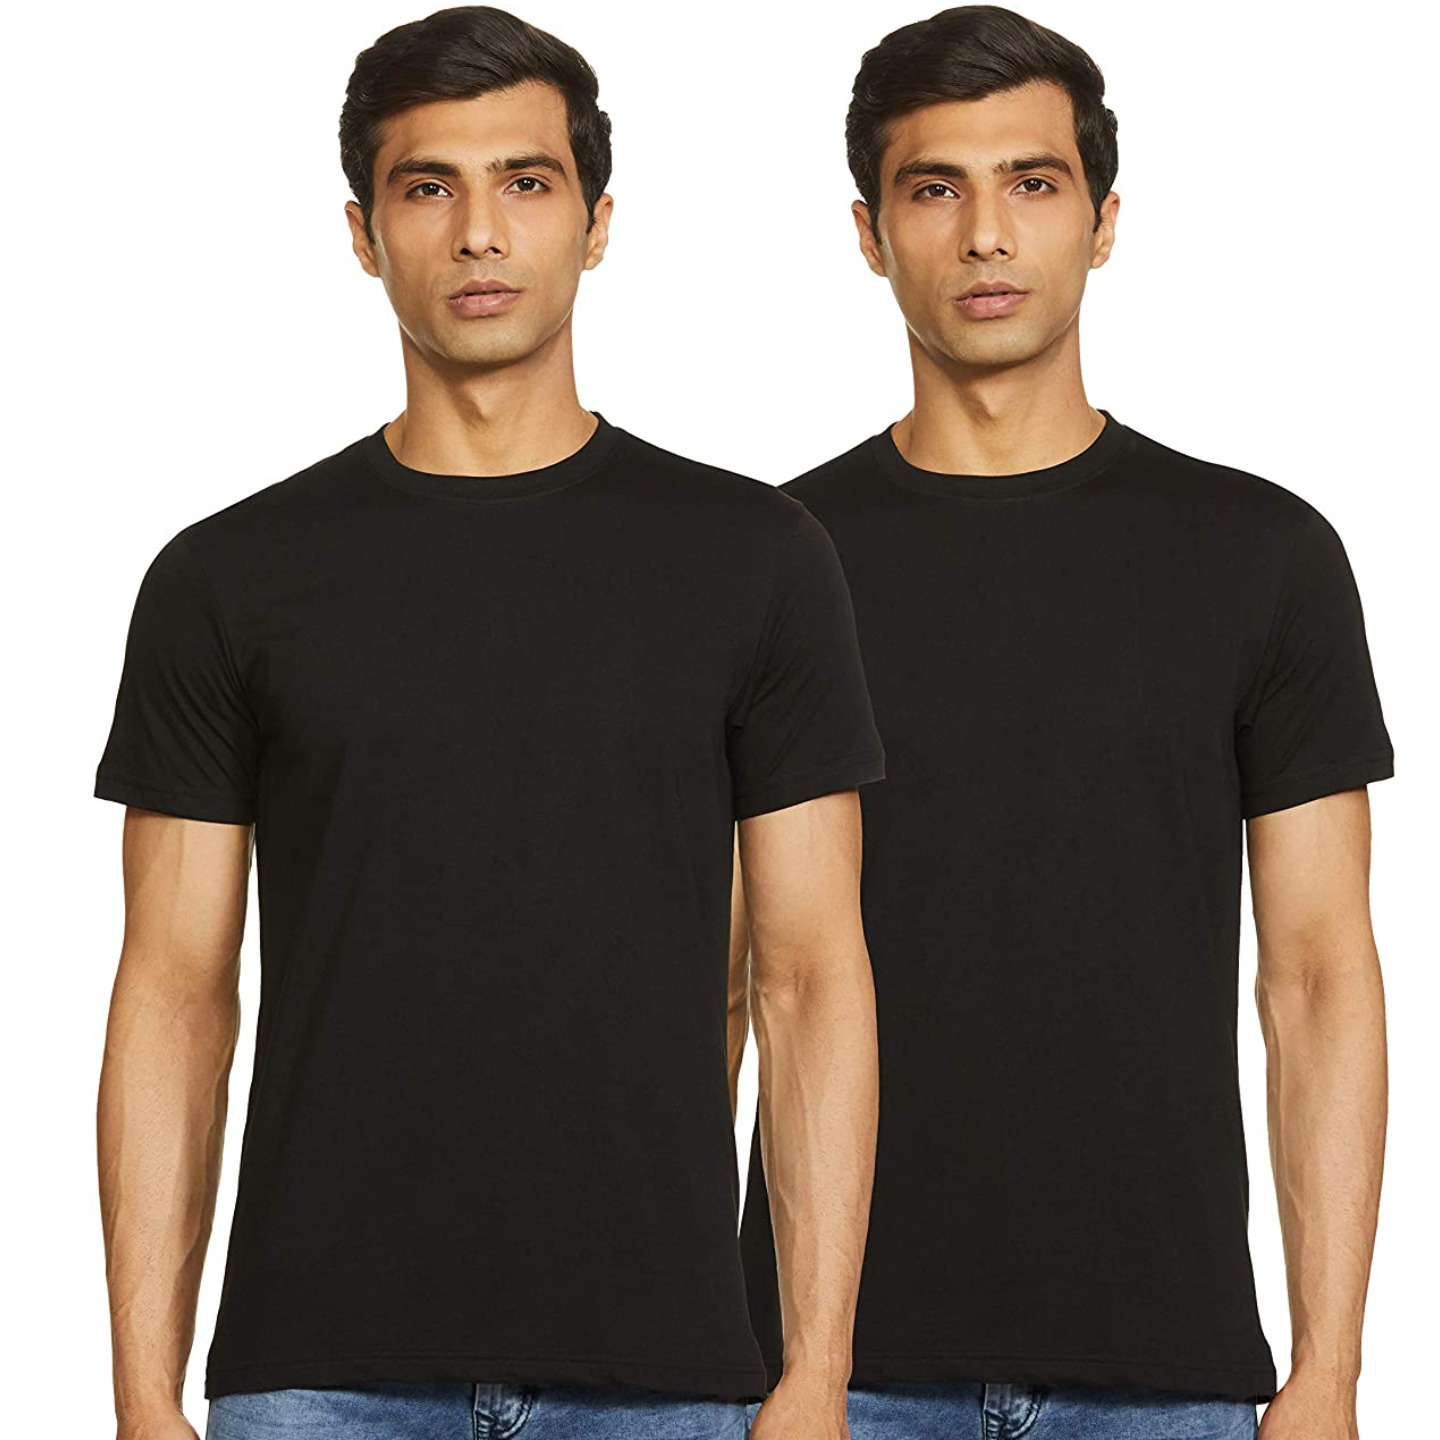 Levi’s Ultra-Soft Cotton 300 LS Classic Round Neck T-Shirts (Pack of 2)